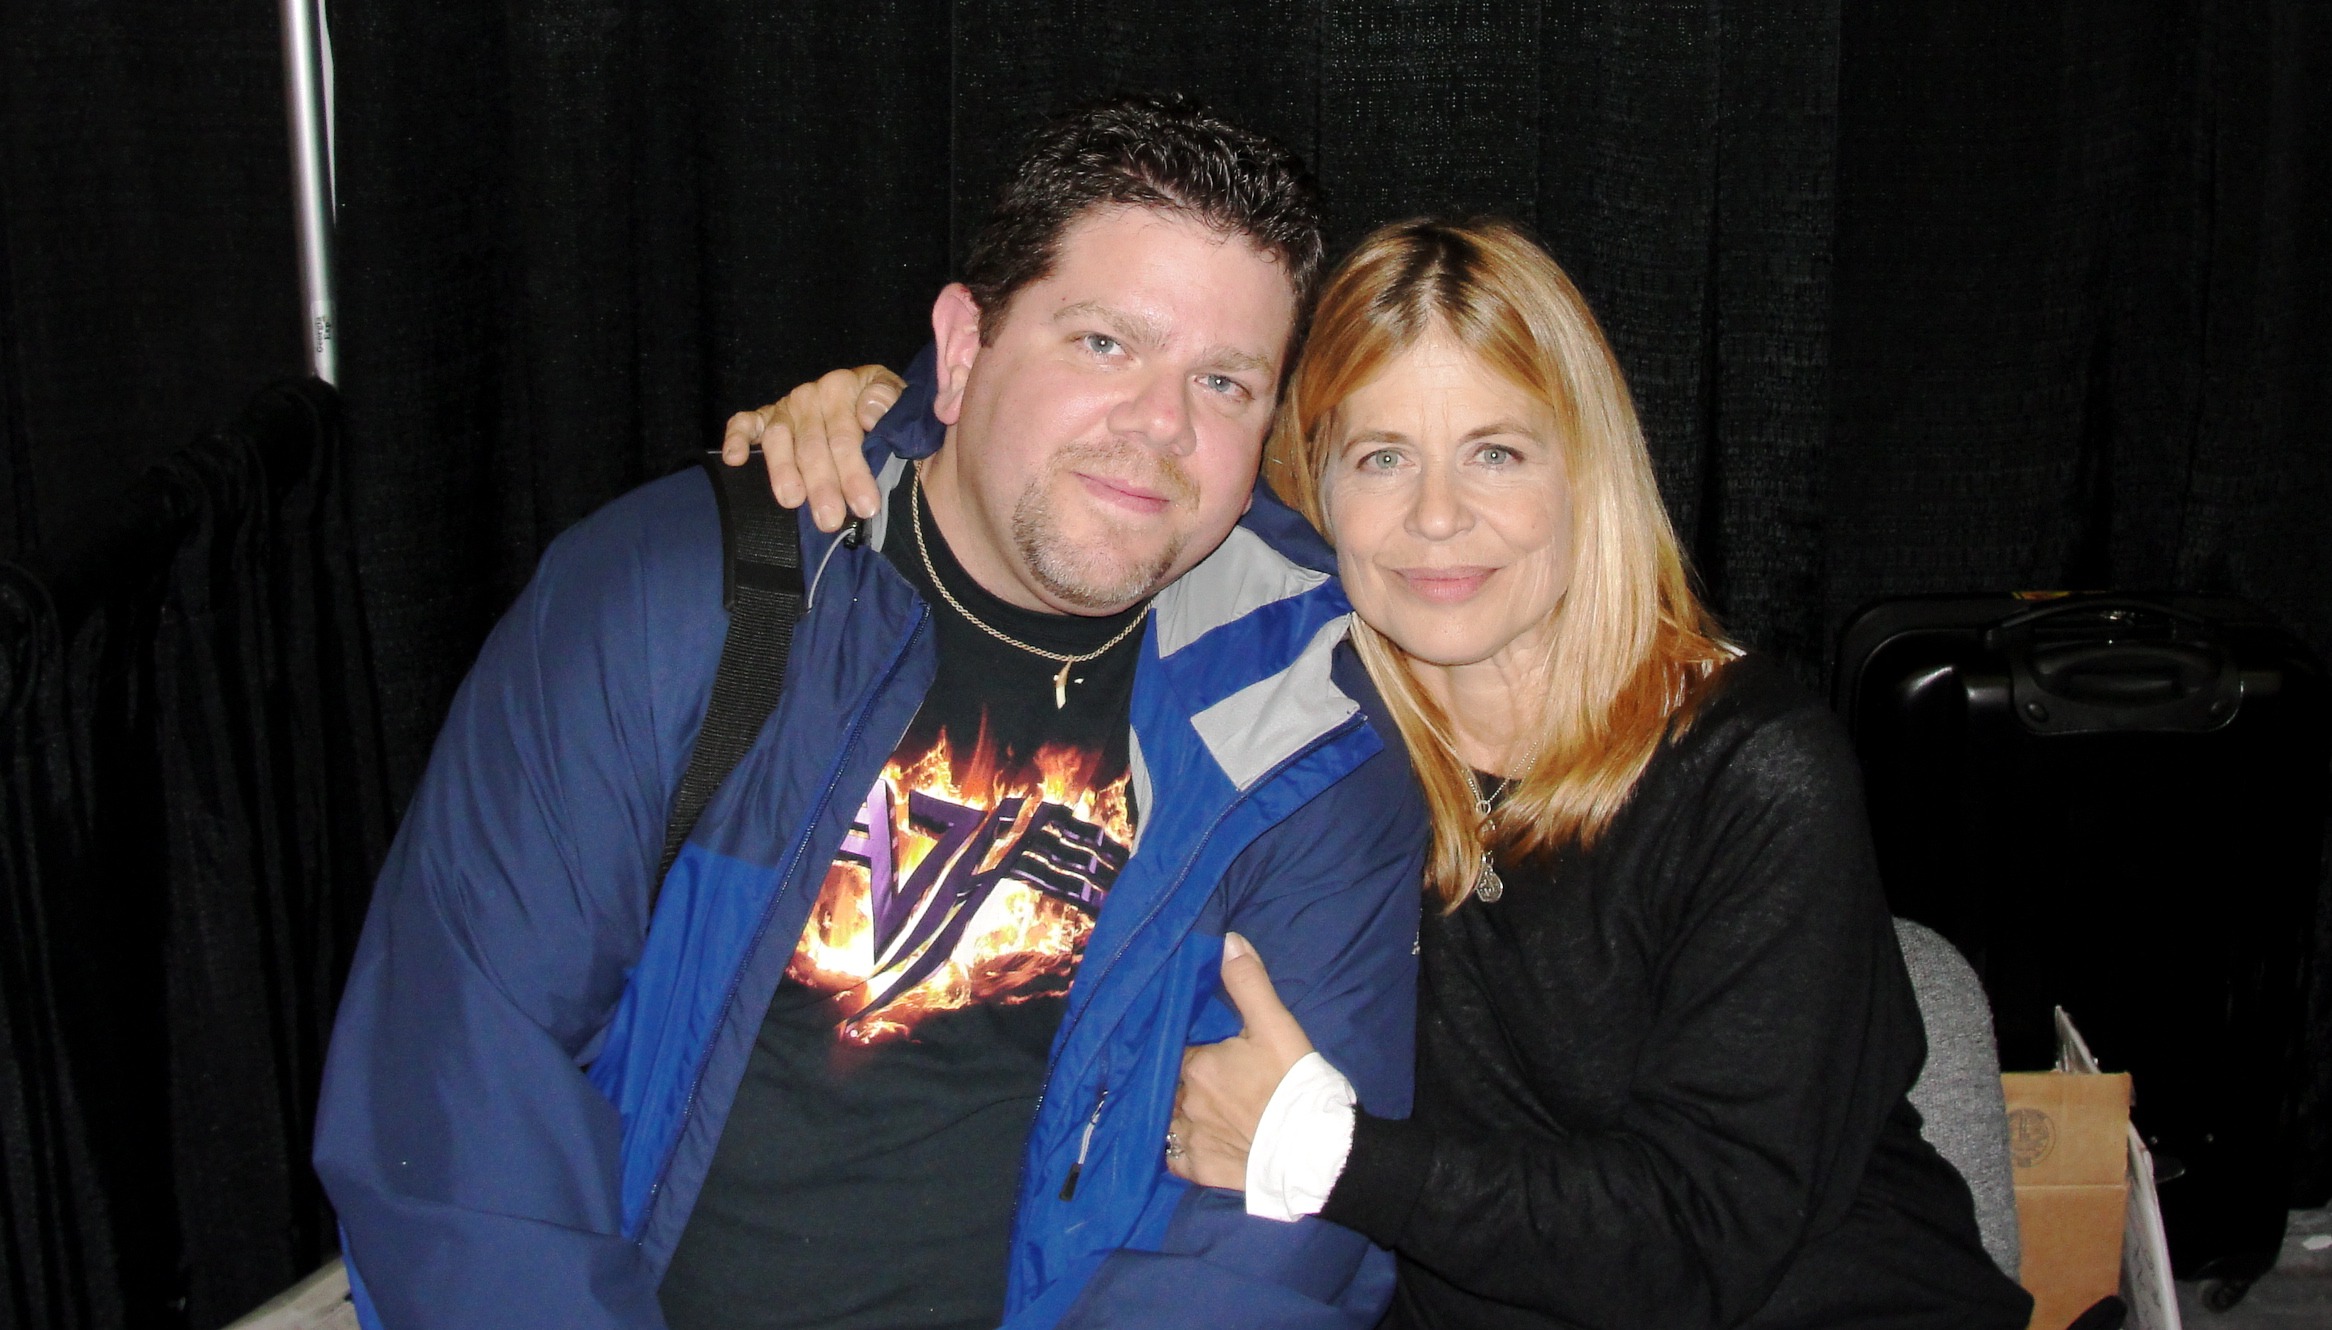 A Terminator's best friend, Linda Hamilton and I in NYC